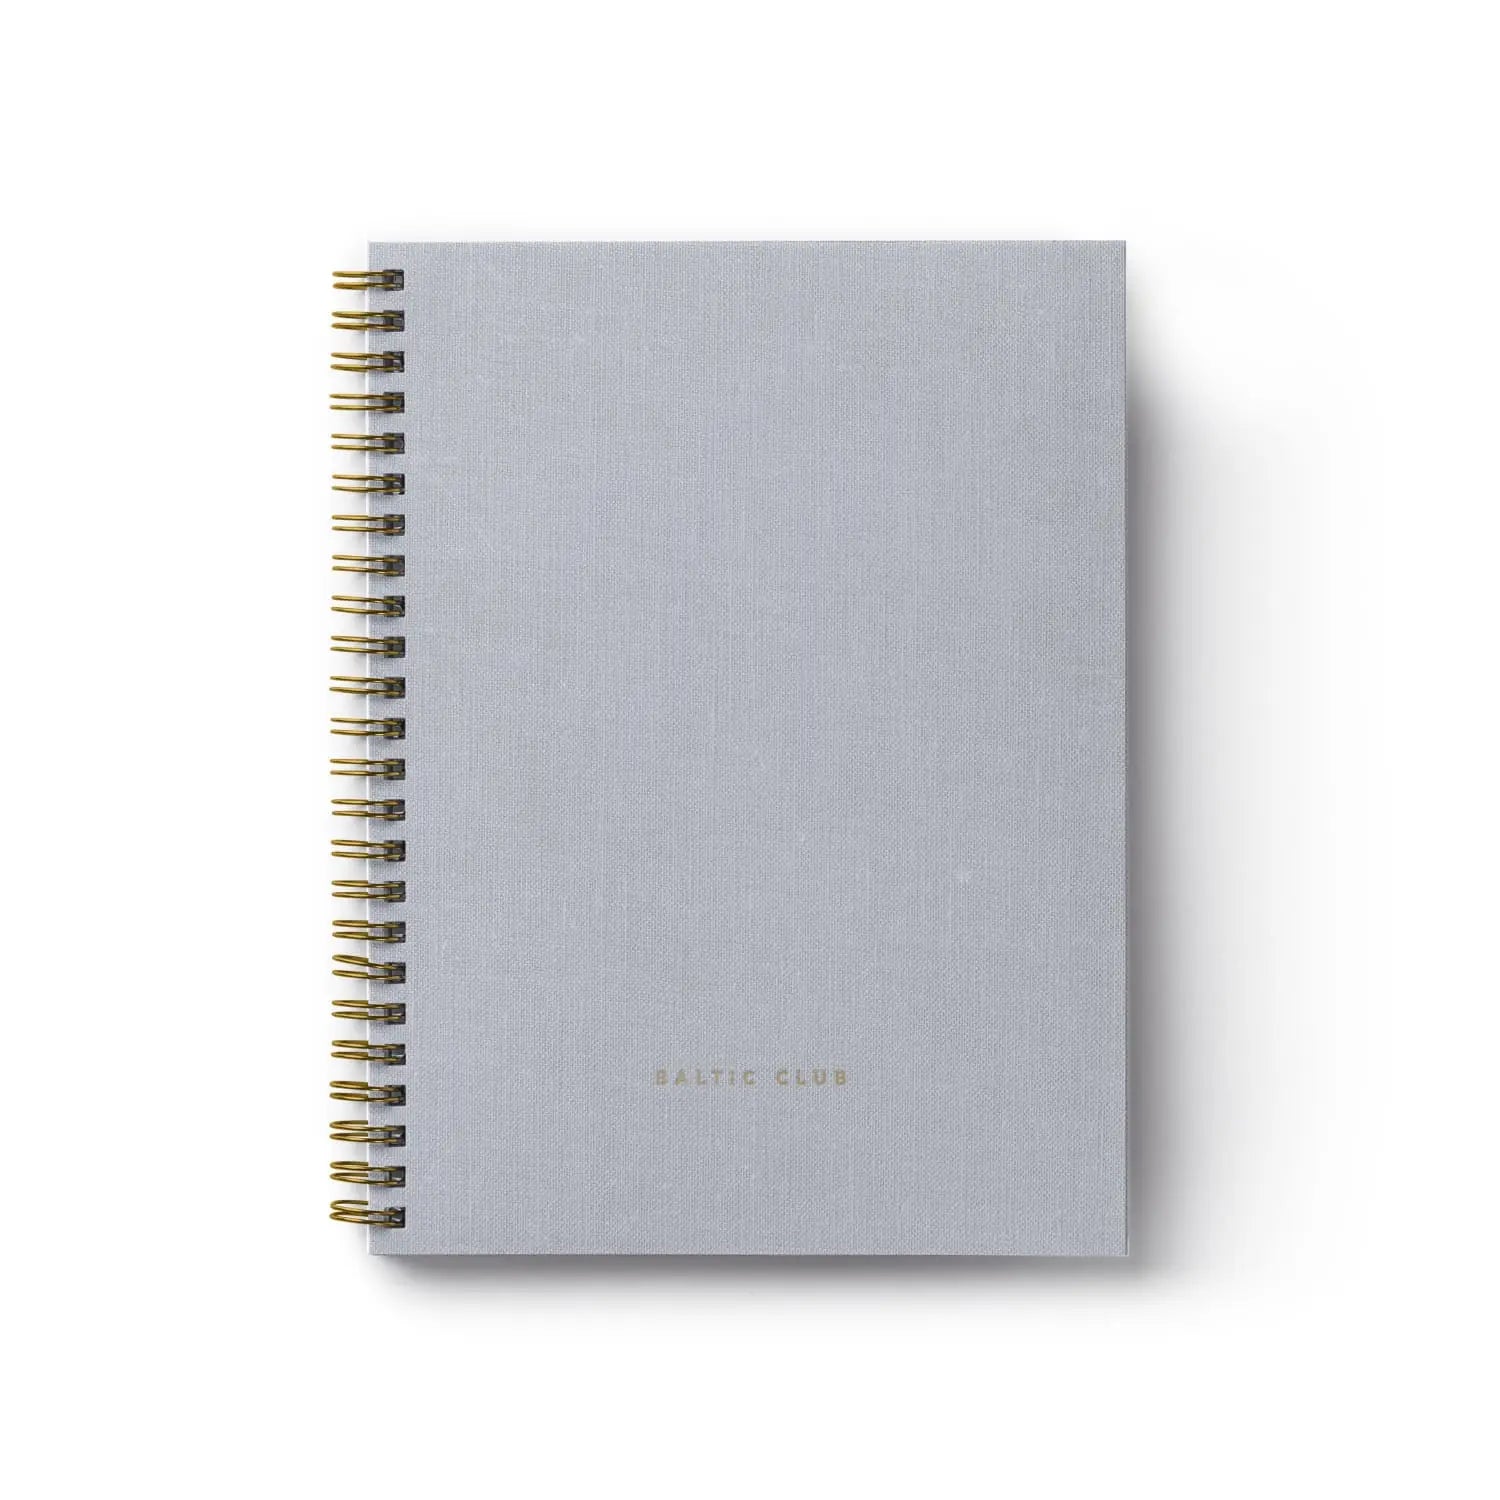 Greetings! Our first hardcover notebooks line